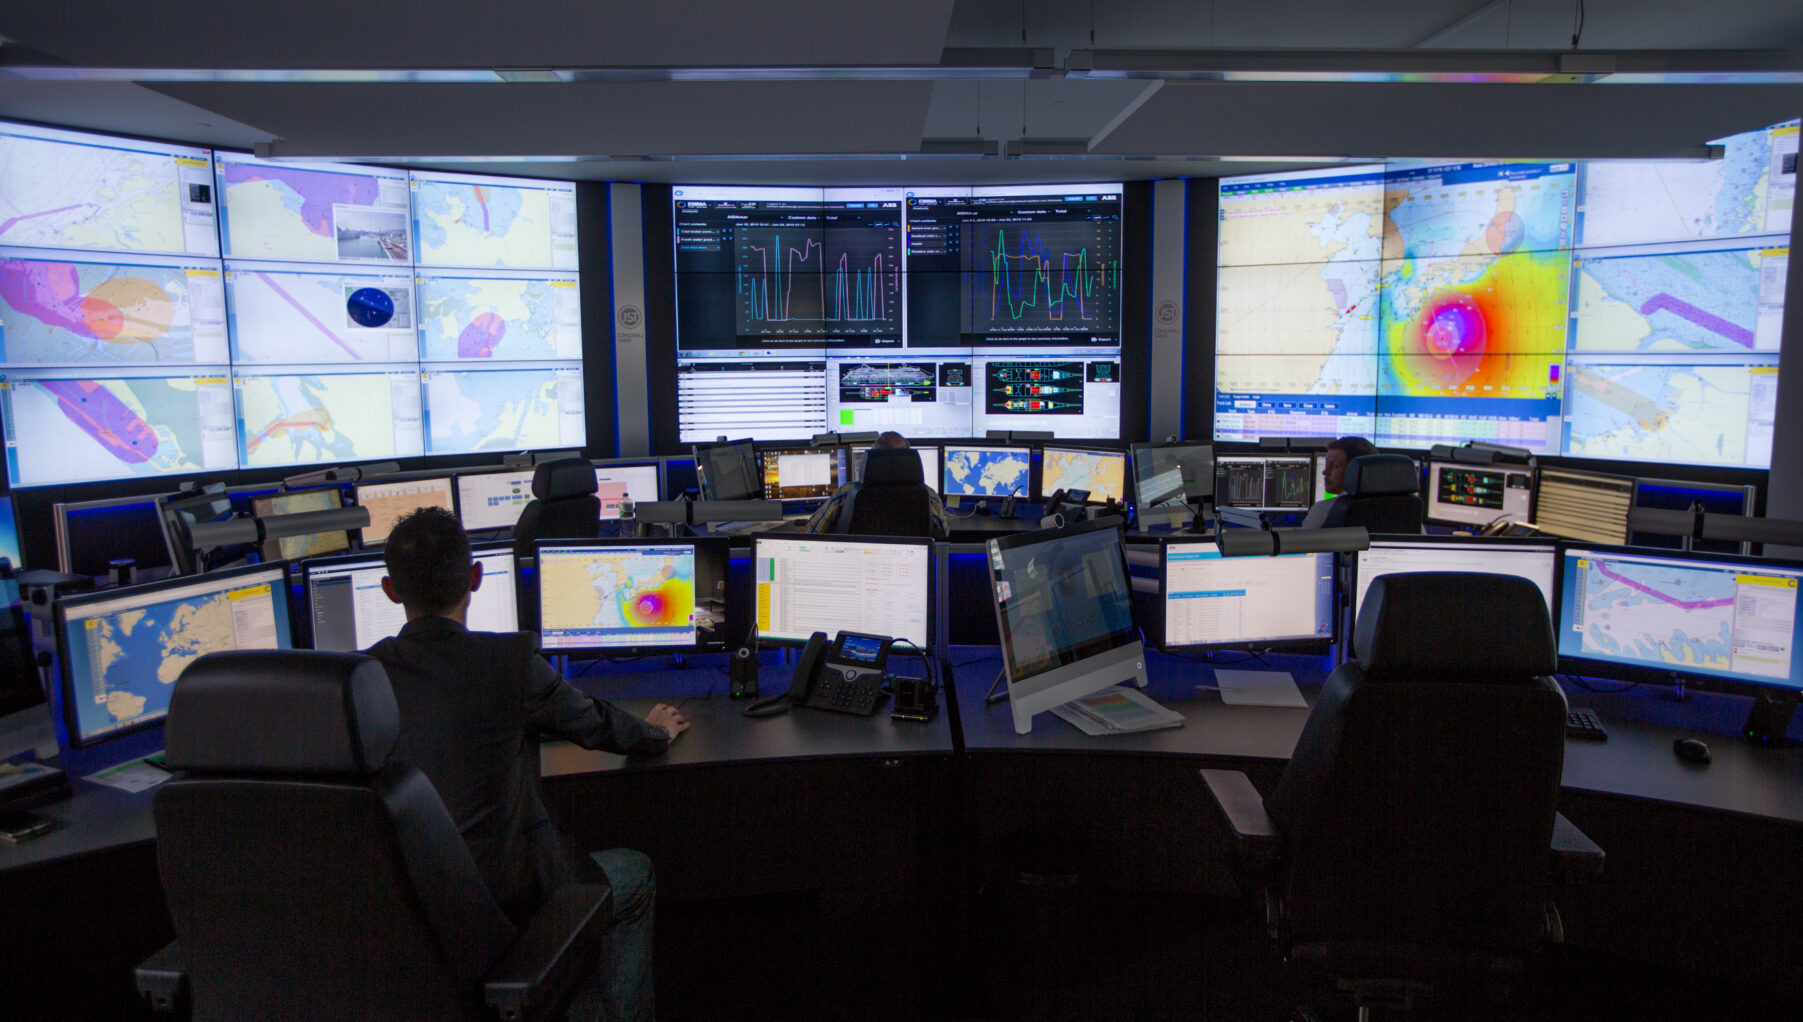 Lots of screens and monitors at Carnival Corporation's global fleet operations centre.